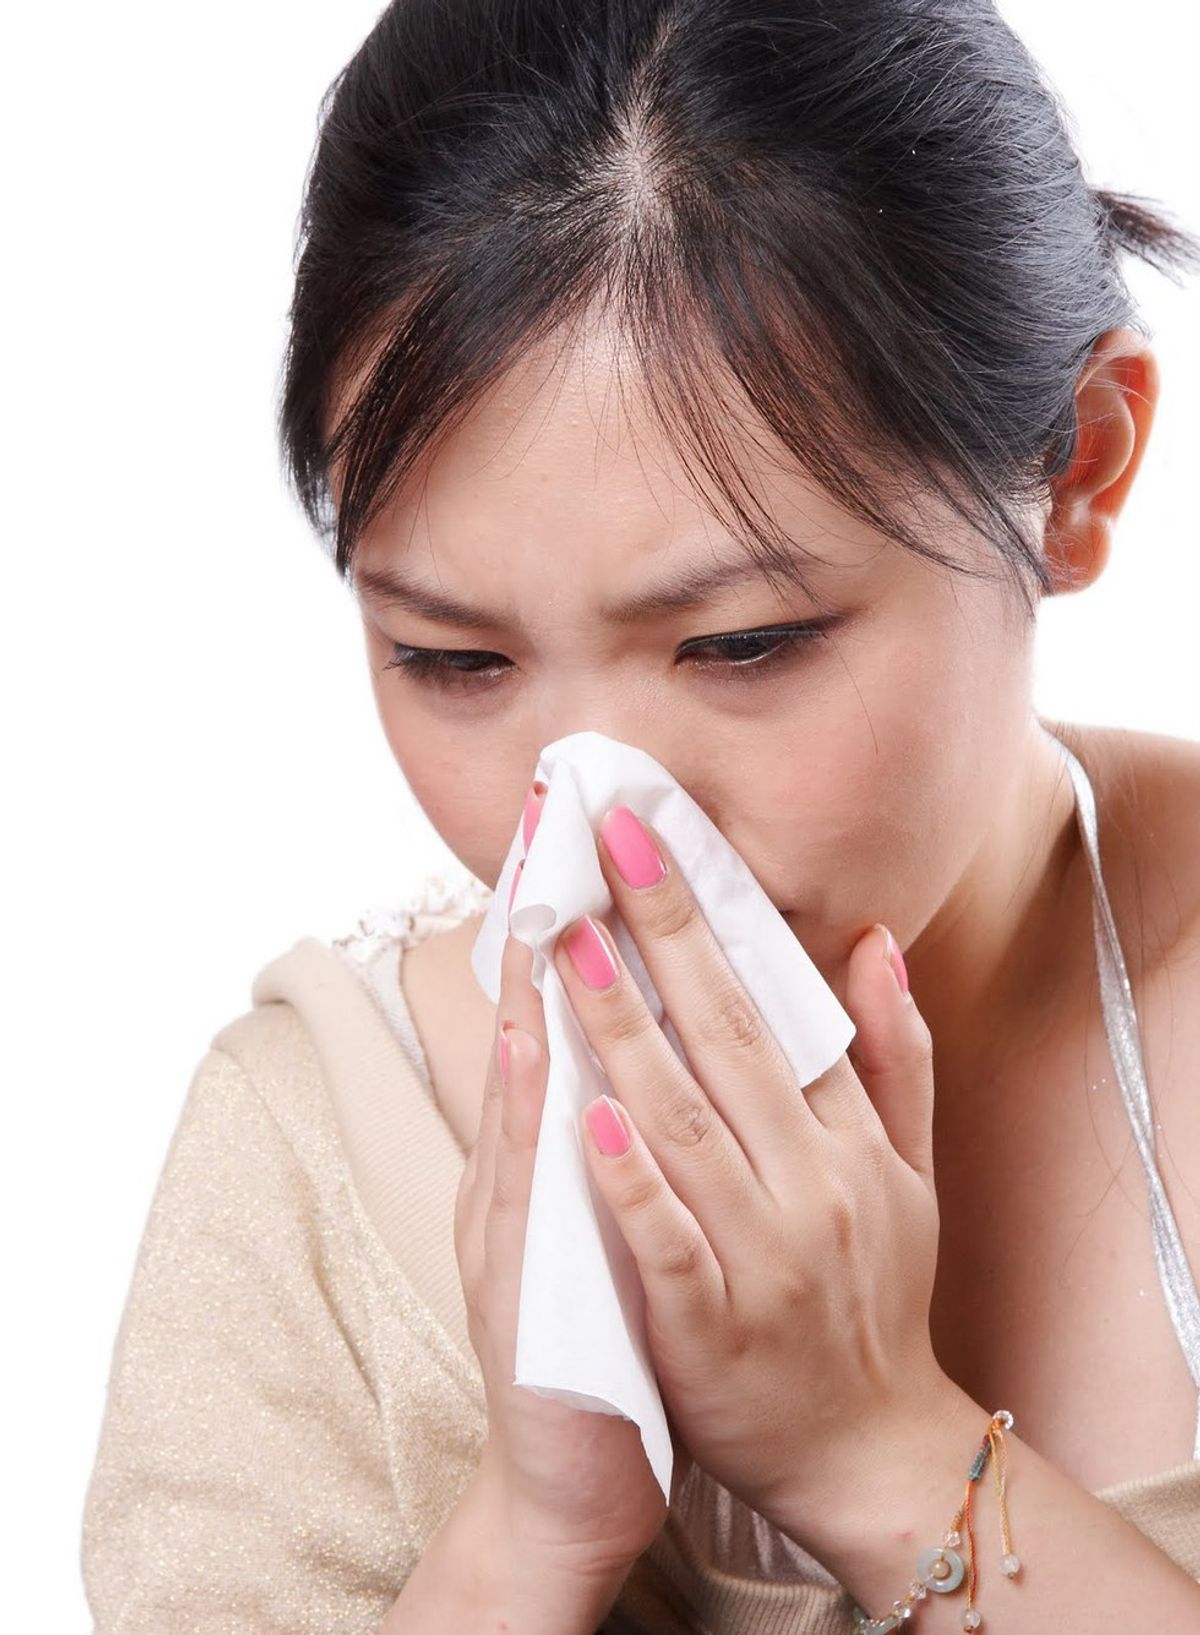 The 10 Stages Of Getting Sick